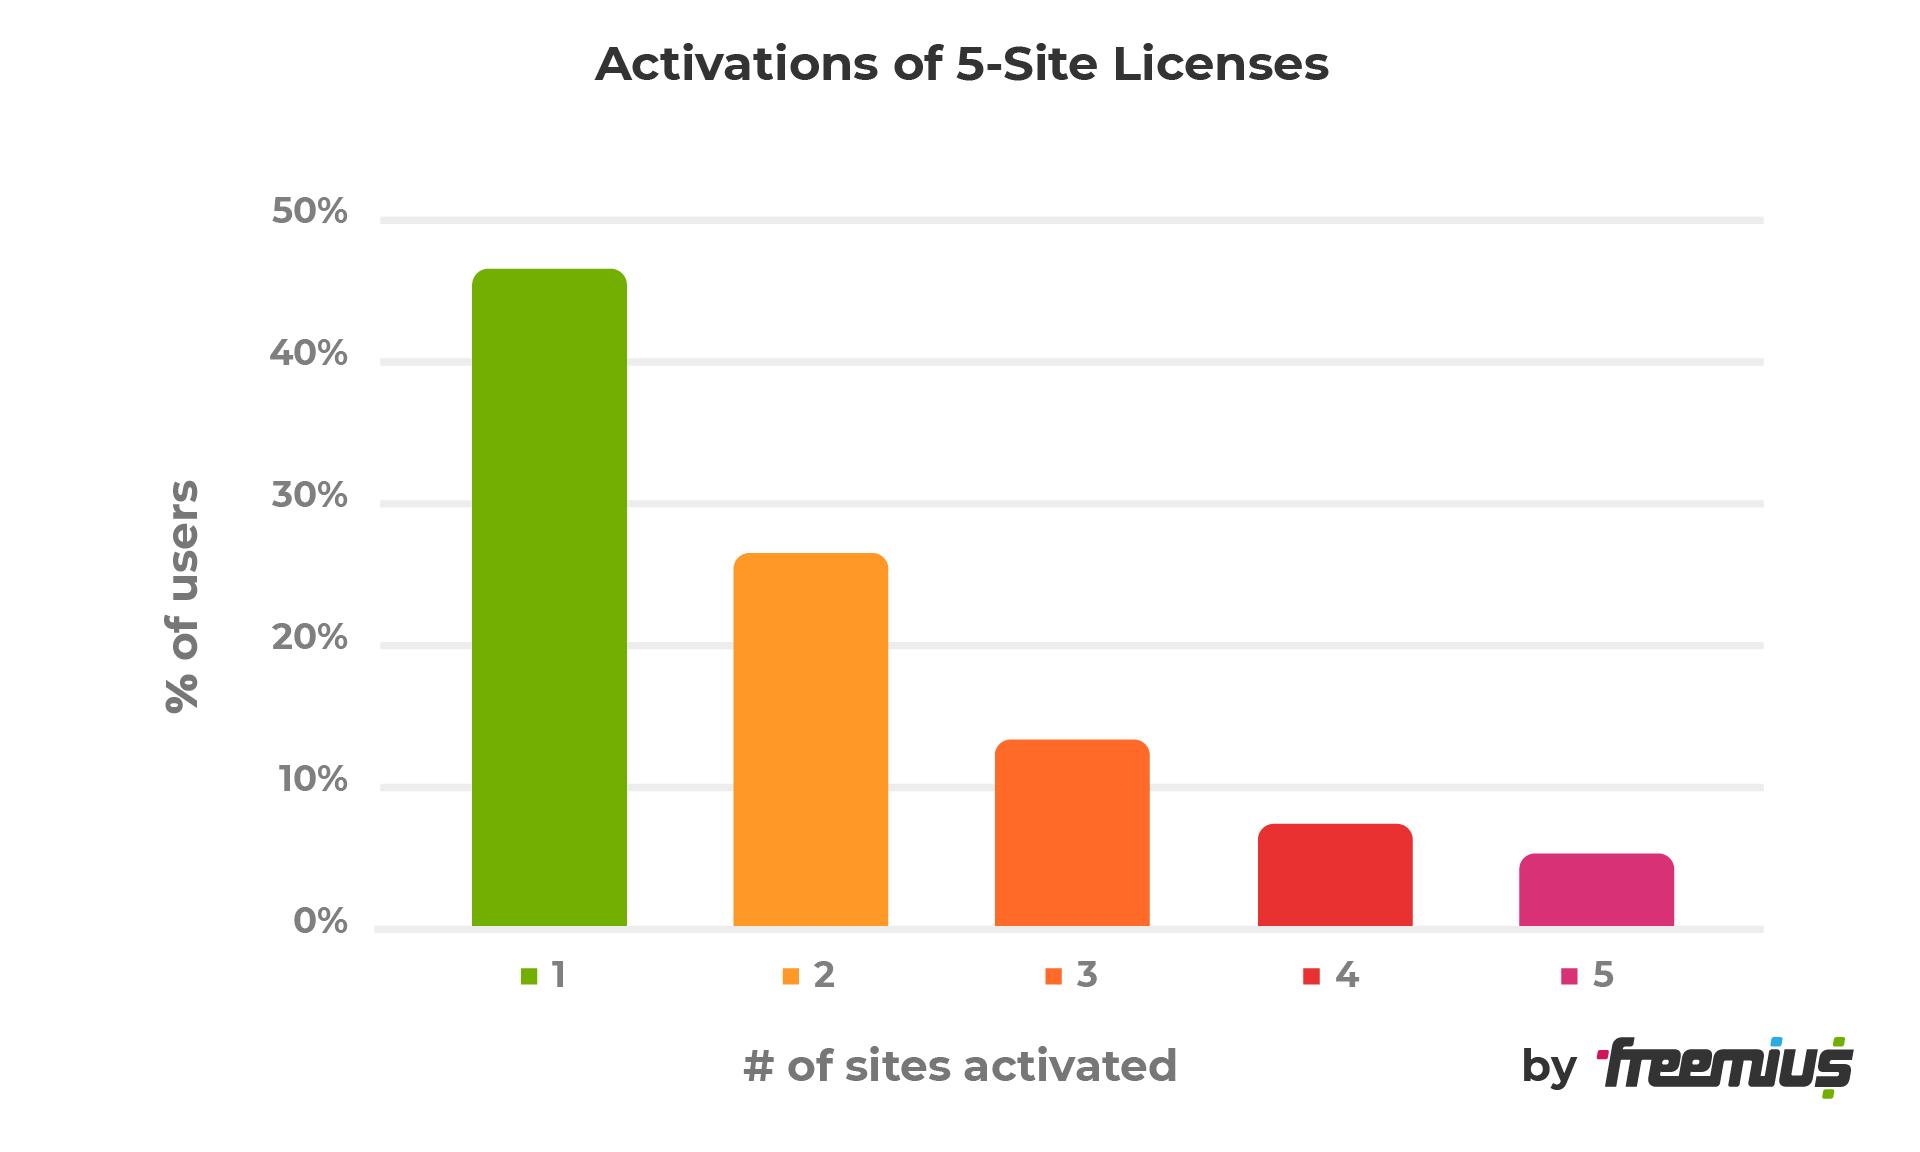 Activations of 5-site licenses